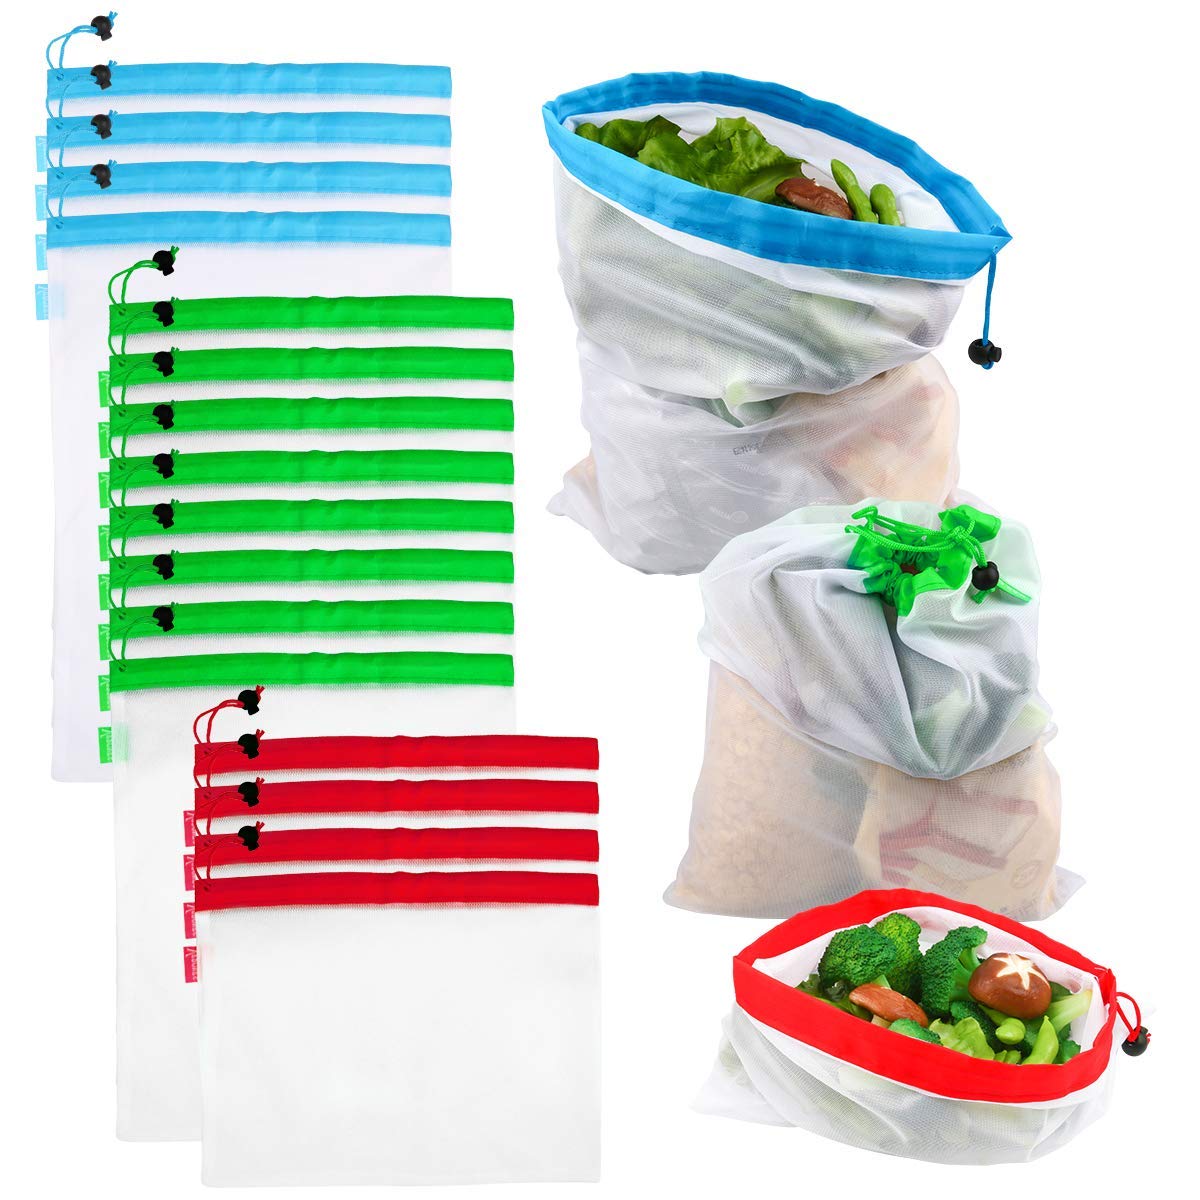 Eco Friendly Reusable  Mesh produce bag,plastic-free,reusable,washable and sustainable